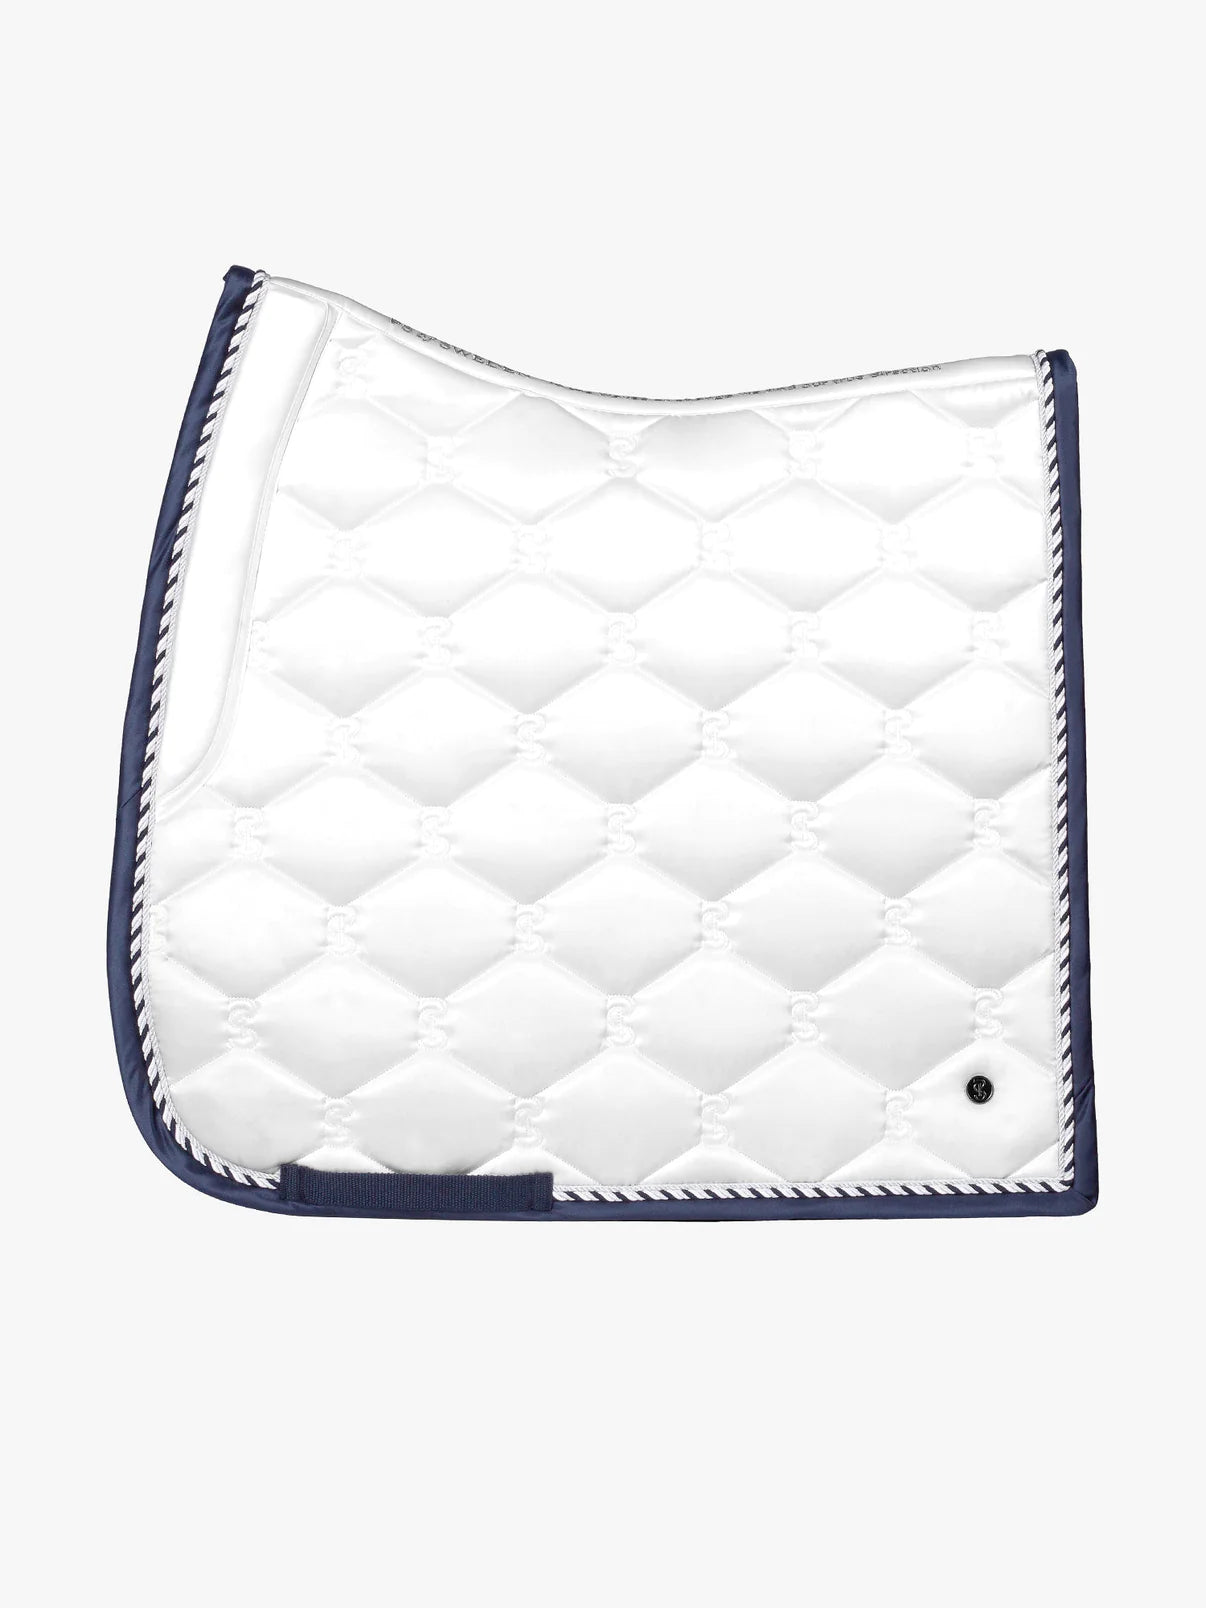 PS of Sweden Saddle Pad Signature White